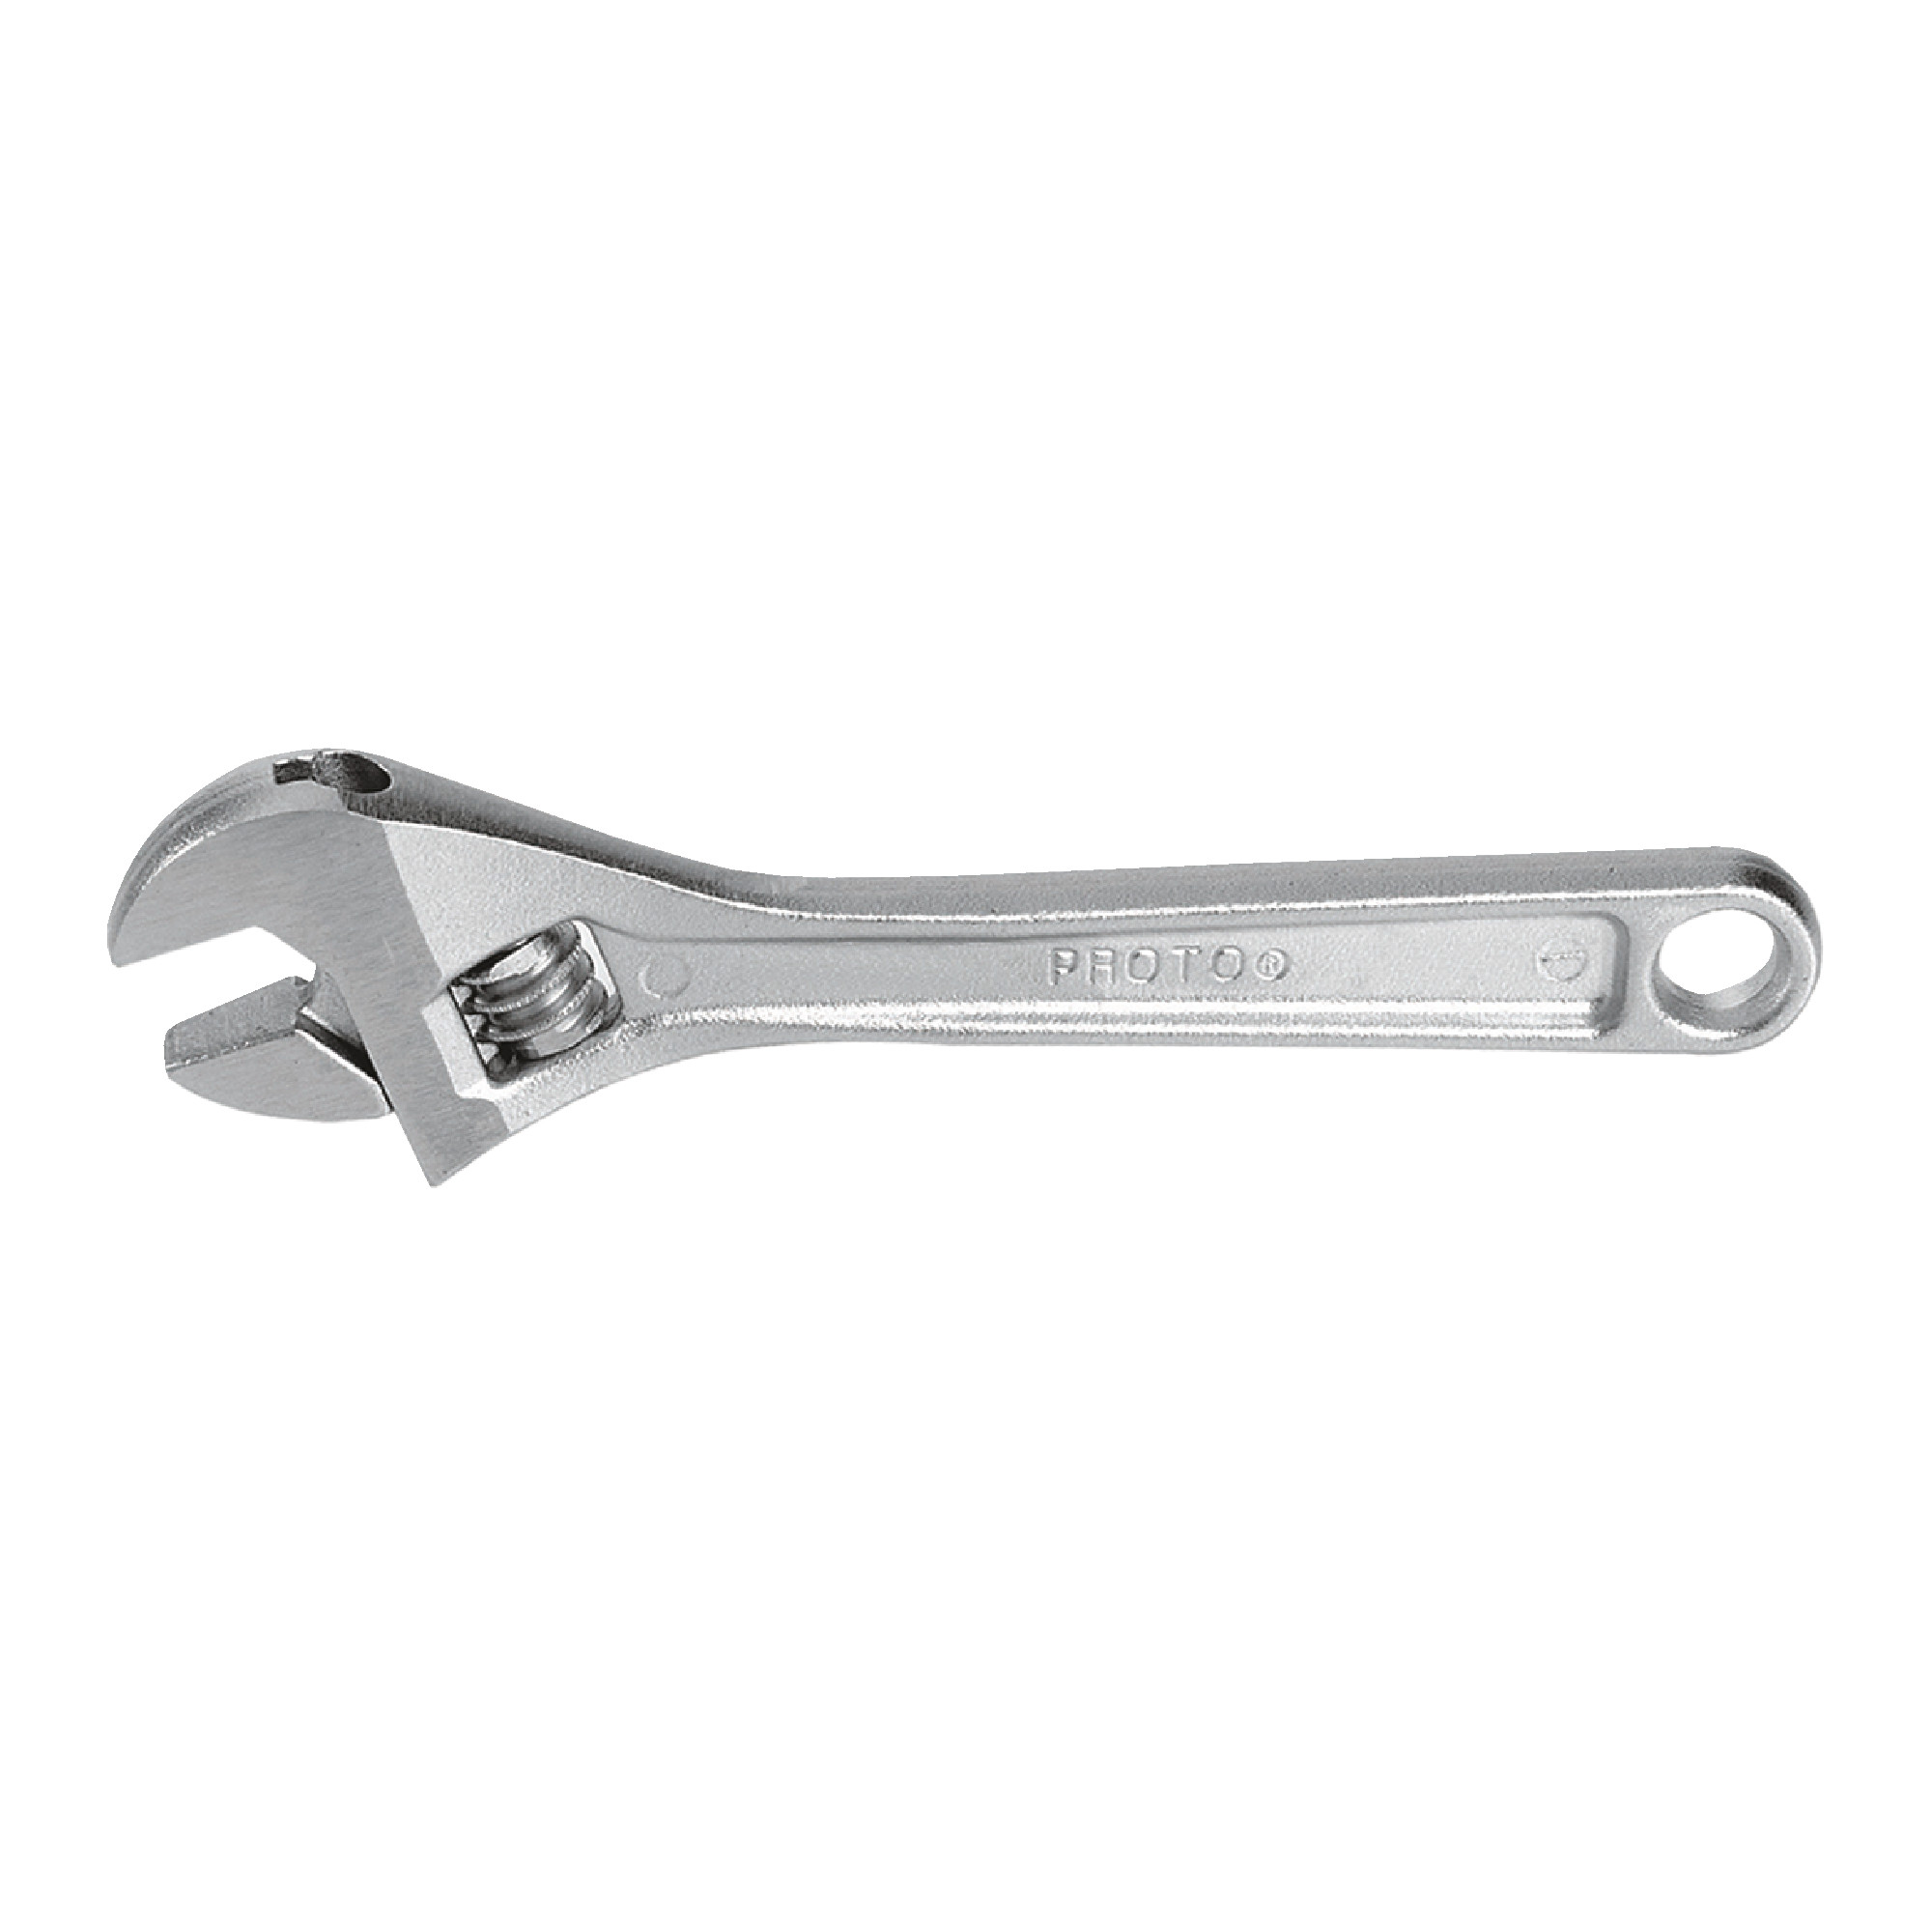 J706 15/16" Adjustable Wrench With Satin Chrome Finish